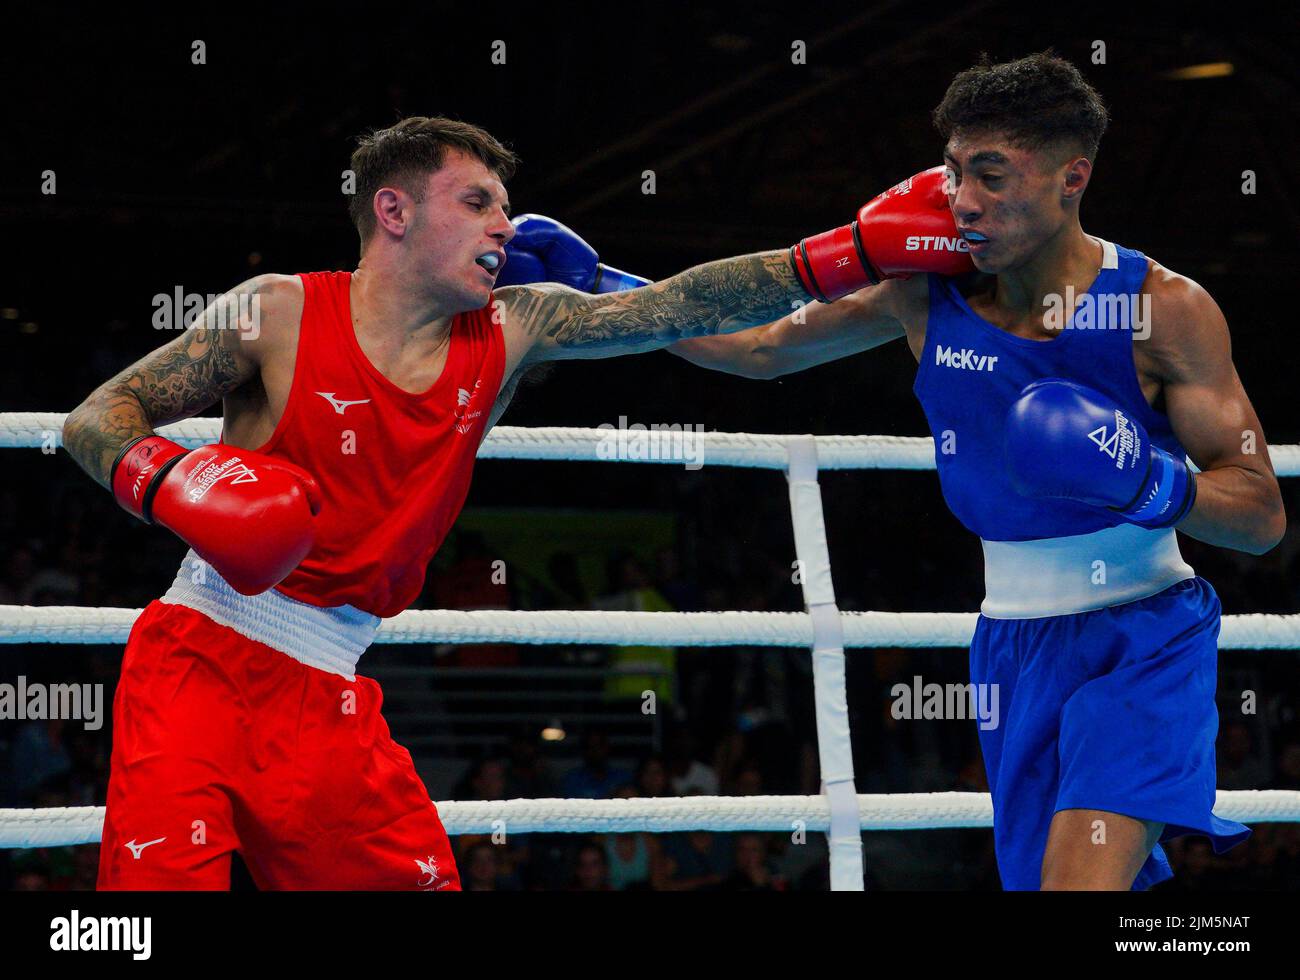 Wales's Jamie Dodd (Red) and Northern Ireland's Clepson Antonio Dos Santos Paiva (Blue) in the Men's Fly (48-51kg) at The NEC on day seven of the 2022 Commonwealth Games in Birmingham. Picture date: Thursday August 4, 2022. Stock Photo